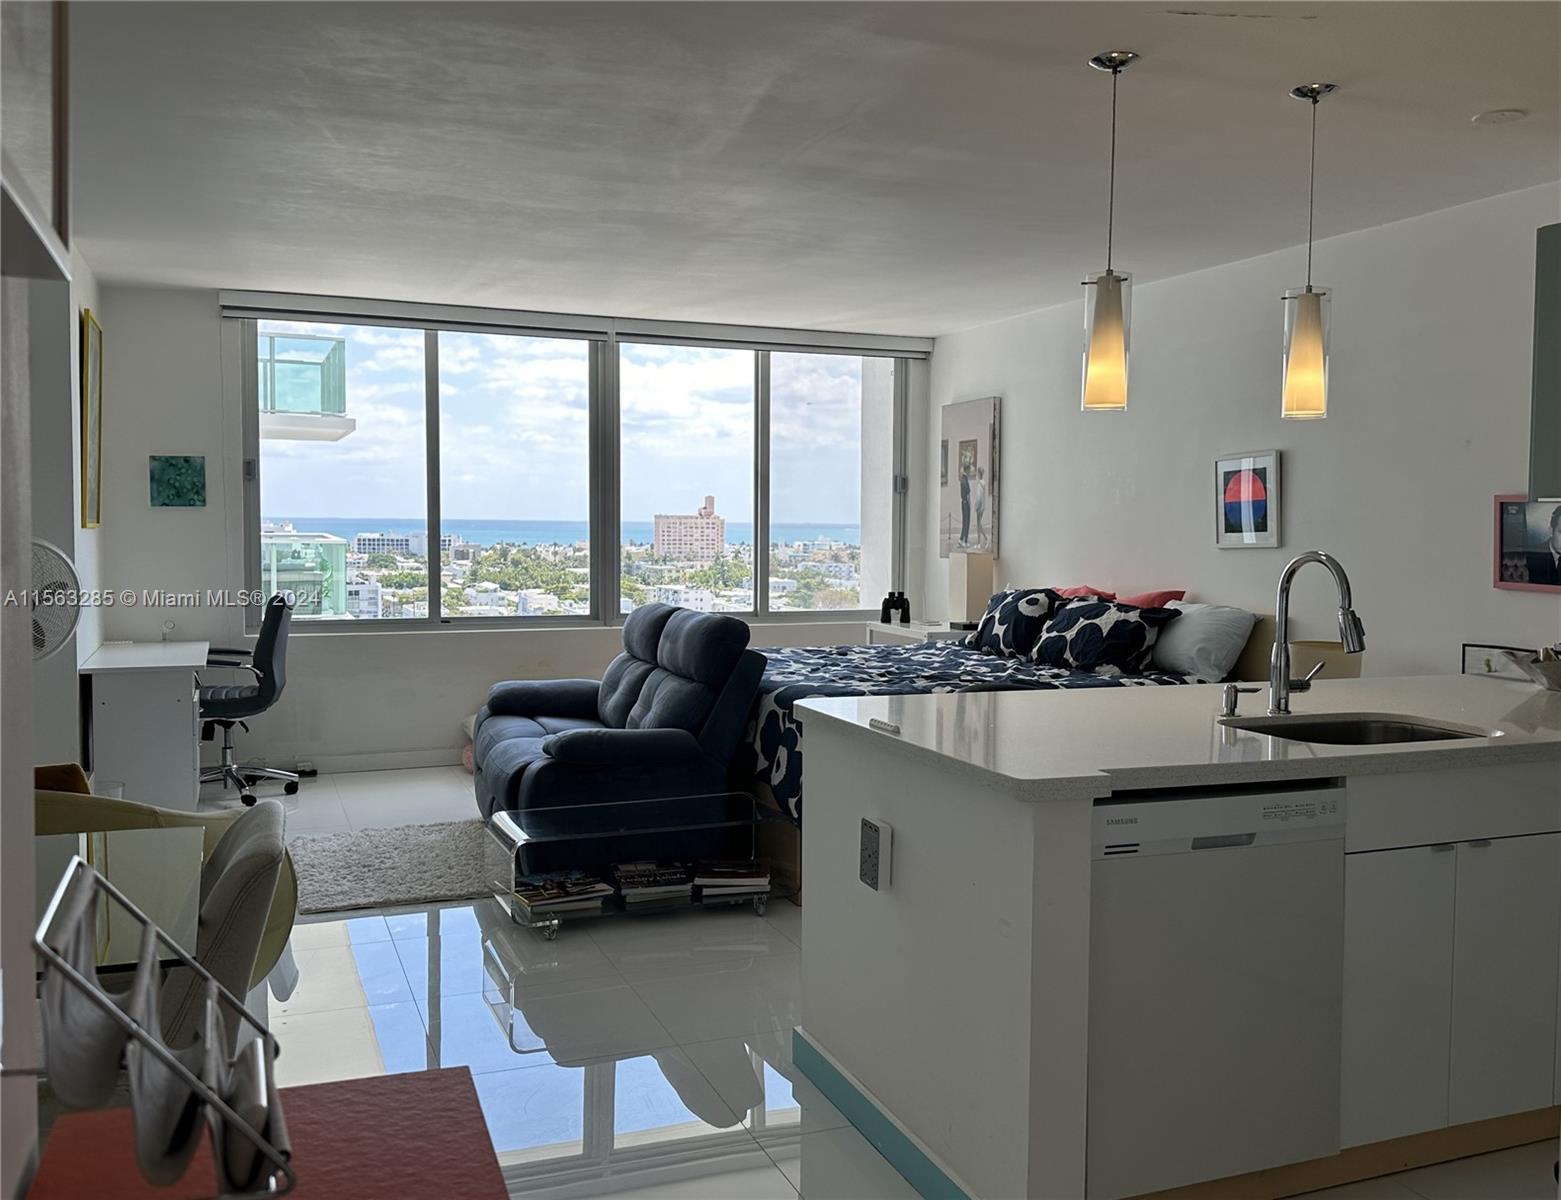 Large, Renovated  studio with Ocean & City View. Washer, Dryer & Stove are in the unit.  Close to Beach, Whole Foods, Lincoln Road, Starbucks, Walgreens. In the Heart of the Art Deco District. Valet $85/month, Full Gym, Cable, Internet, 24 Hr Concierge, Security included in Rent. Spacious 682 square feet in an Ideal Building with an EXCELLENT Location & price. Just Bring Your Clothes!!!! Enjoy the Life of SoBe!!! TEXT/Call for showings. Available May 15 till Nov 30th!!!